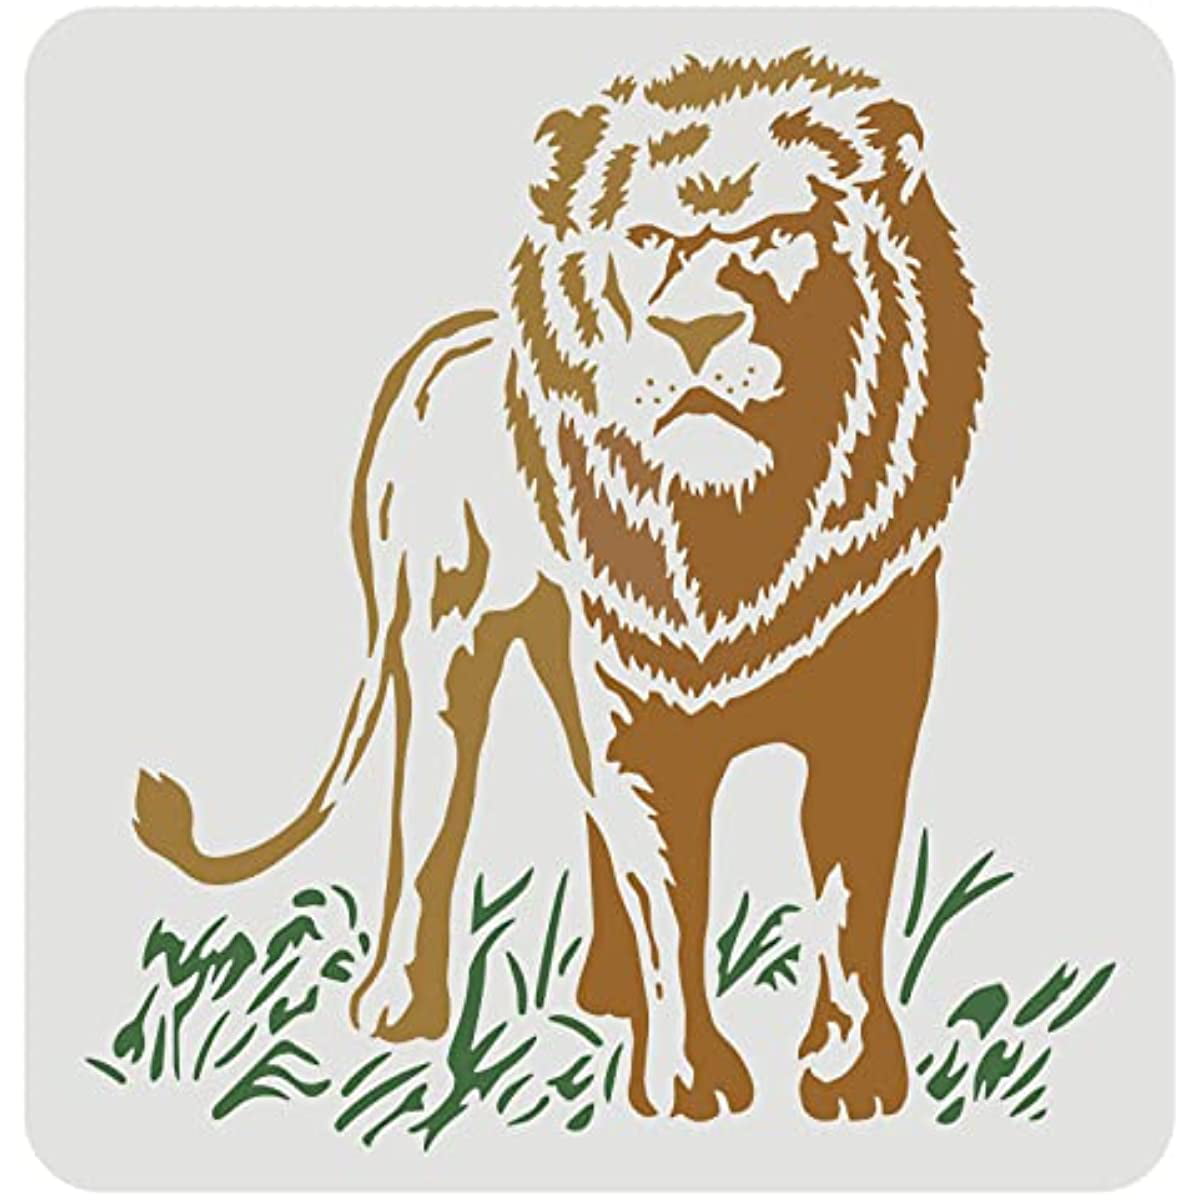 Lion Stencil  inch Wild Animal Stencils Plastic Prairie Lion  Stencil Reusable Lion Pattern Stencils for DIY Home Decor Painting on Wood  Floor Wall and Tile 